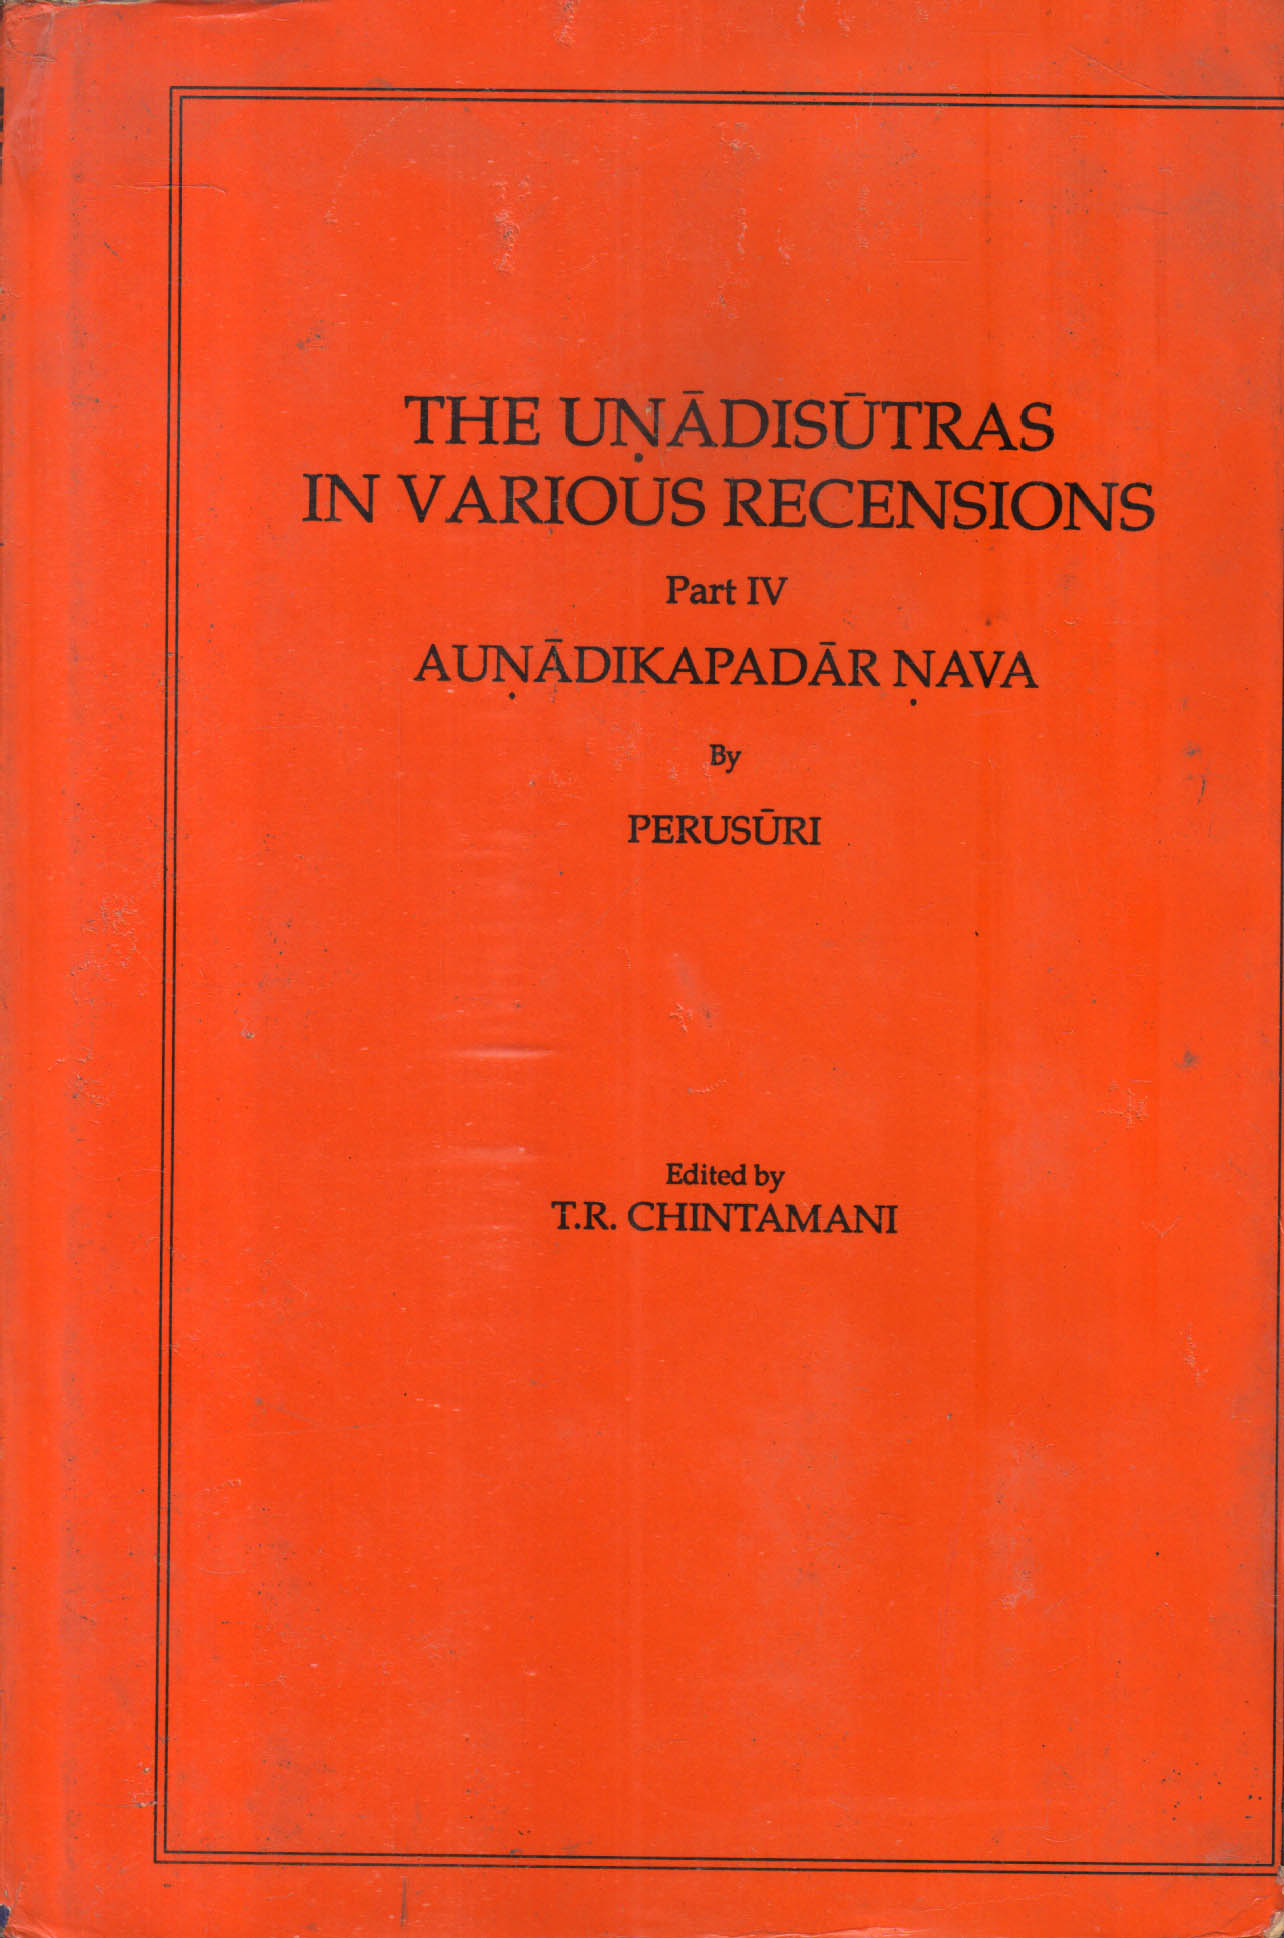 The Unadisutras In Various Recensions (Part 1,2 & 4)